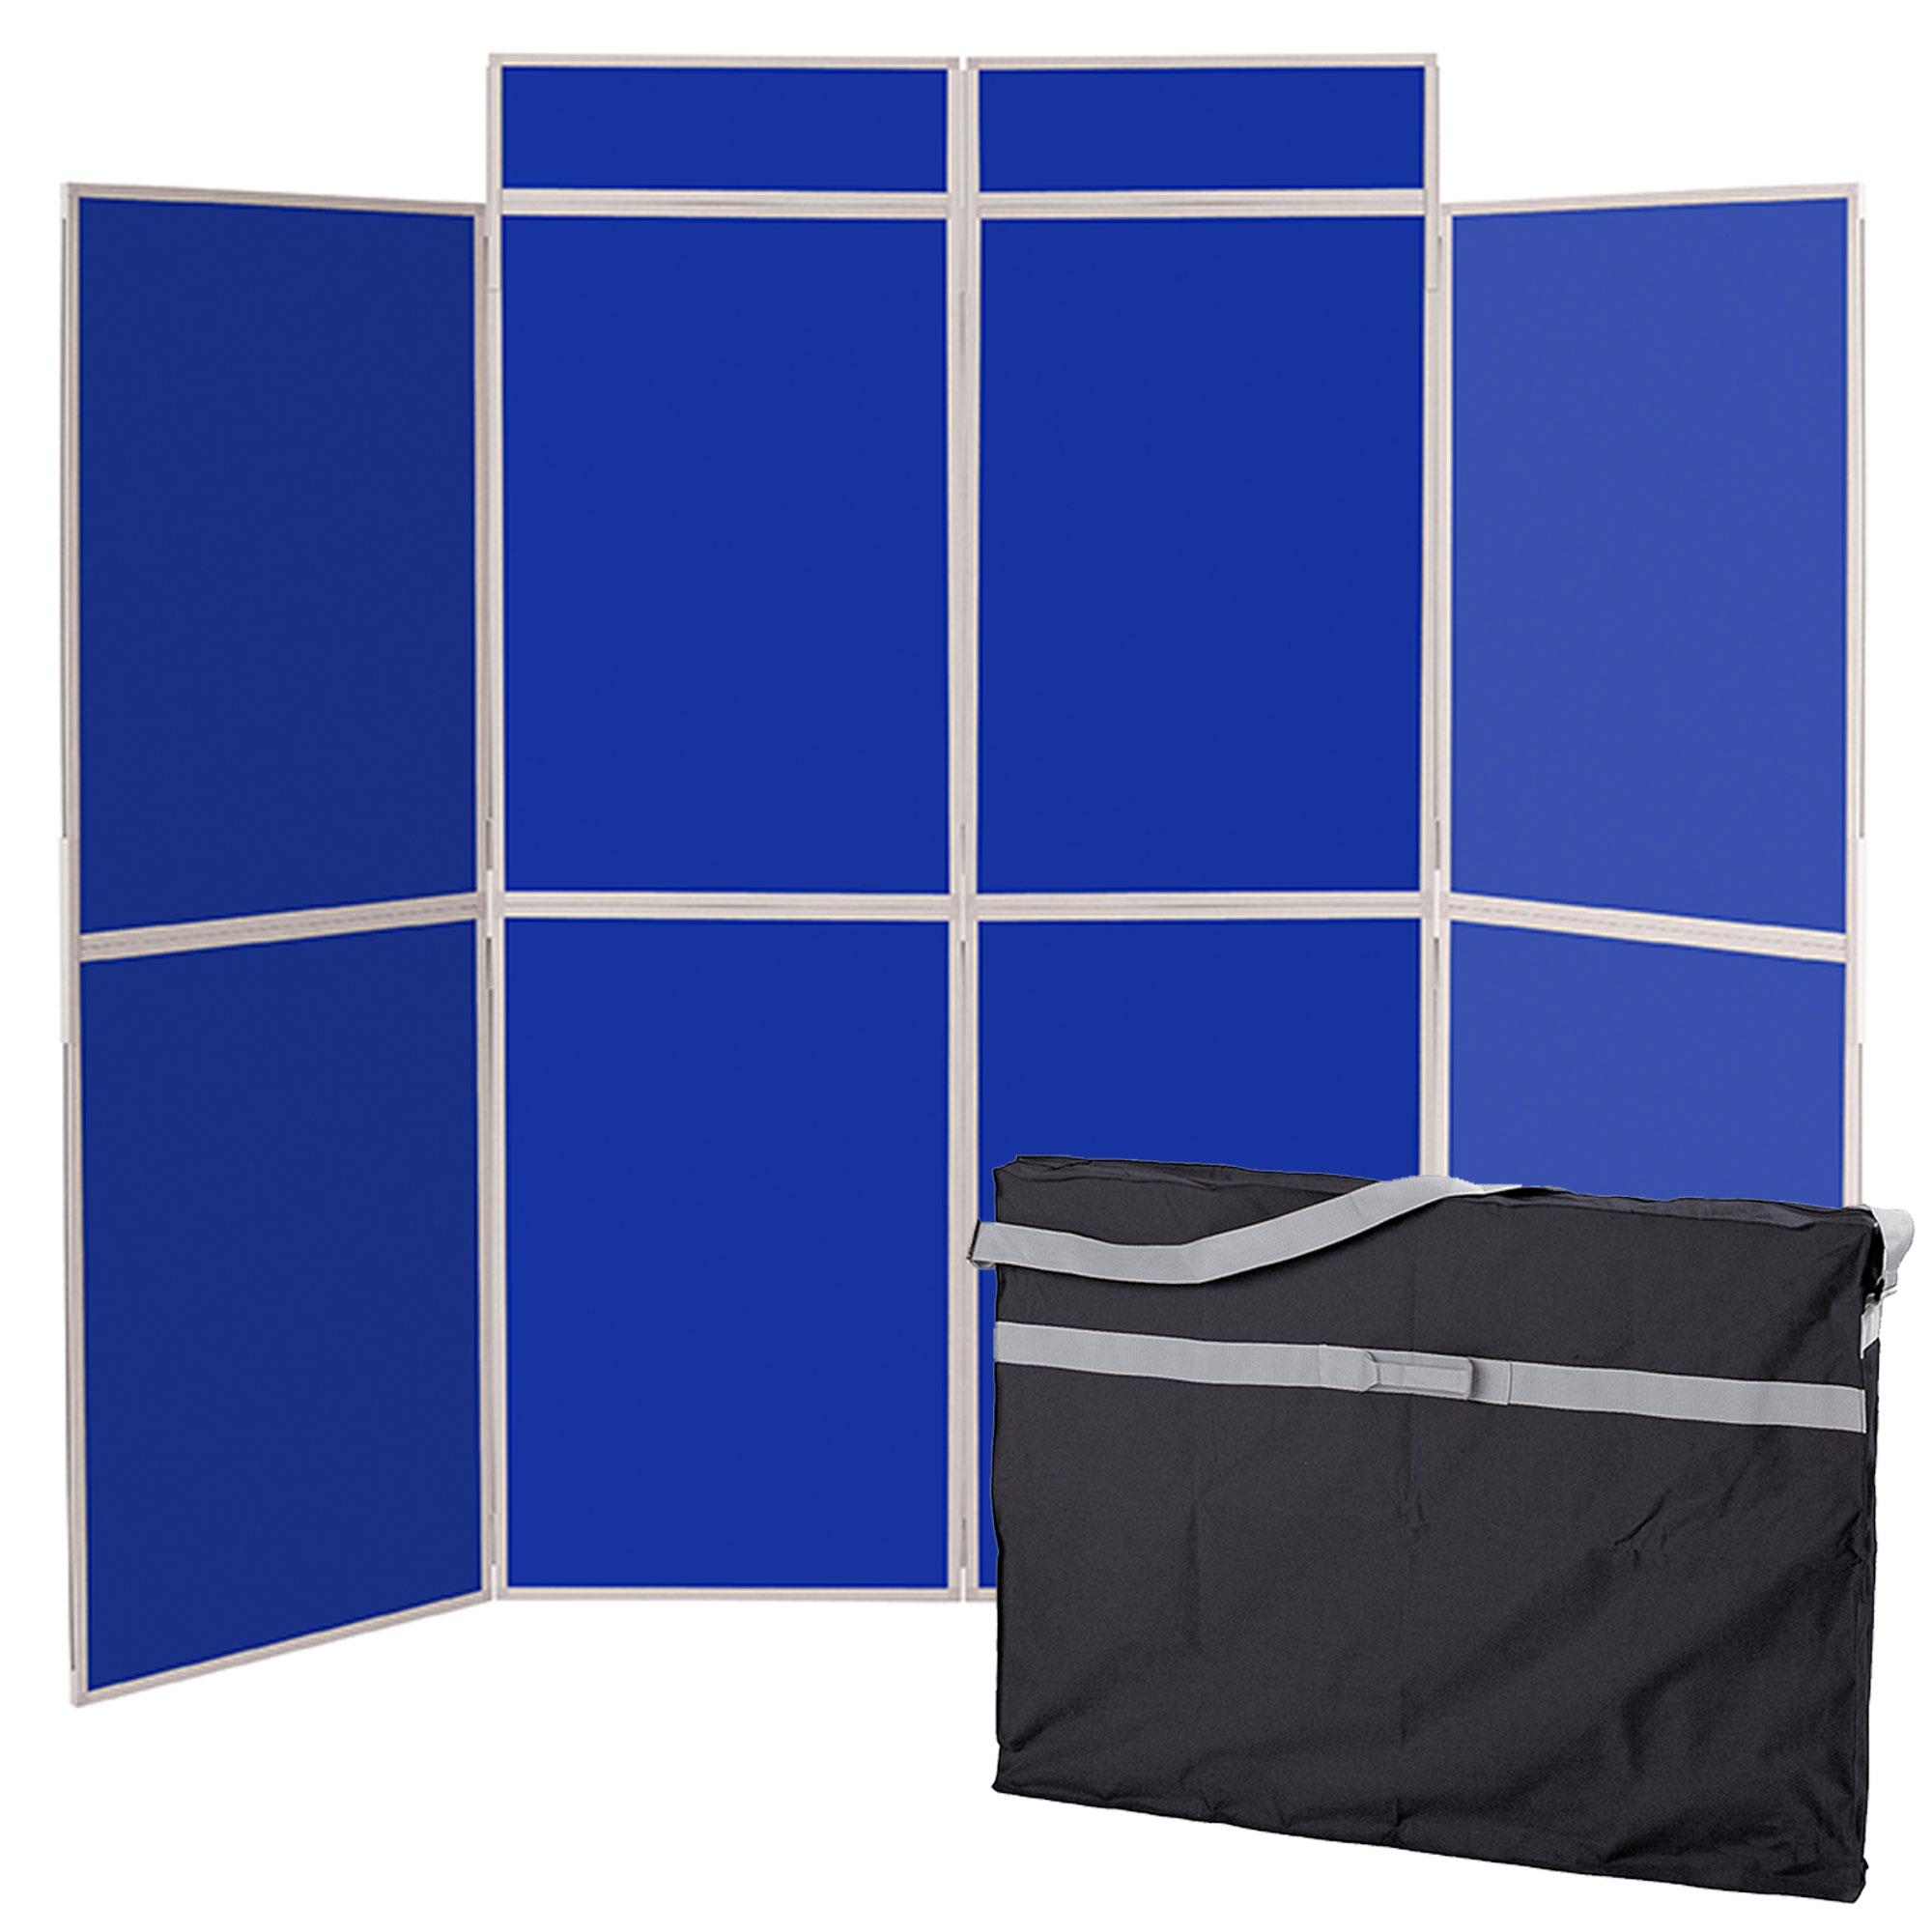 Black with Grey Frame Offices 11 Colours For Schools Room Divider Exhibitions Wonderwall Folding 6 Panel Display Kit with Bag & Header/Office partition